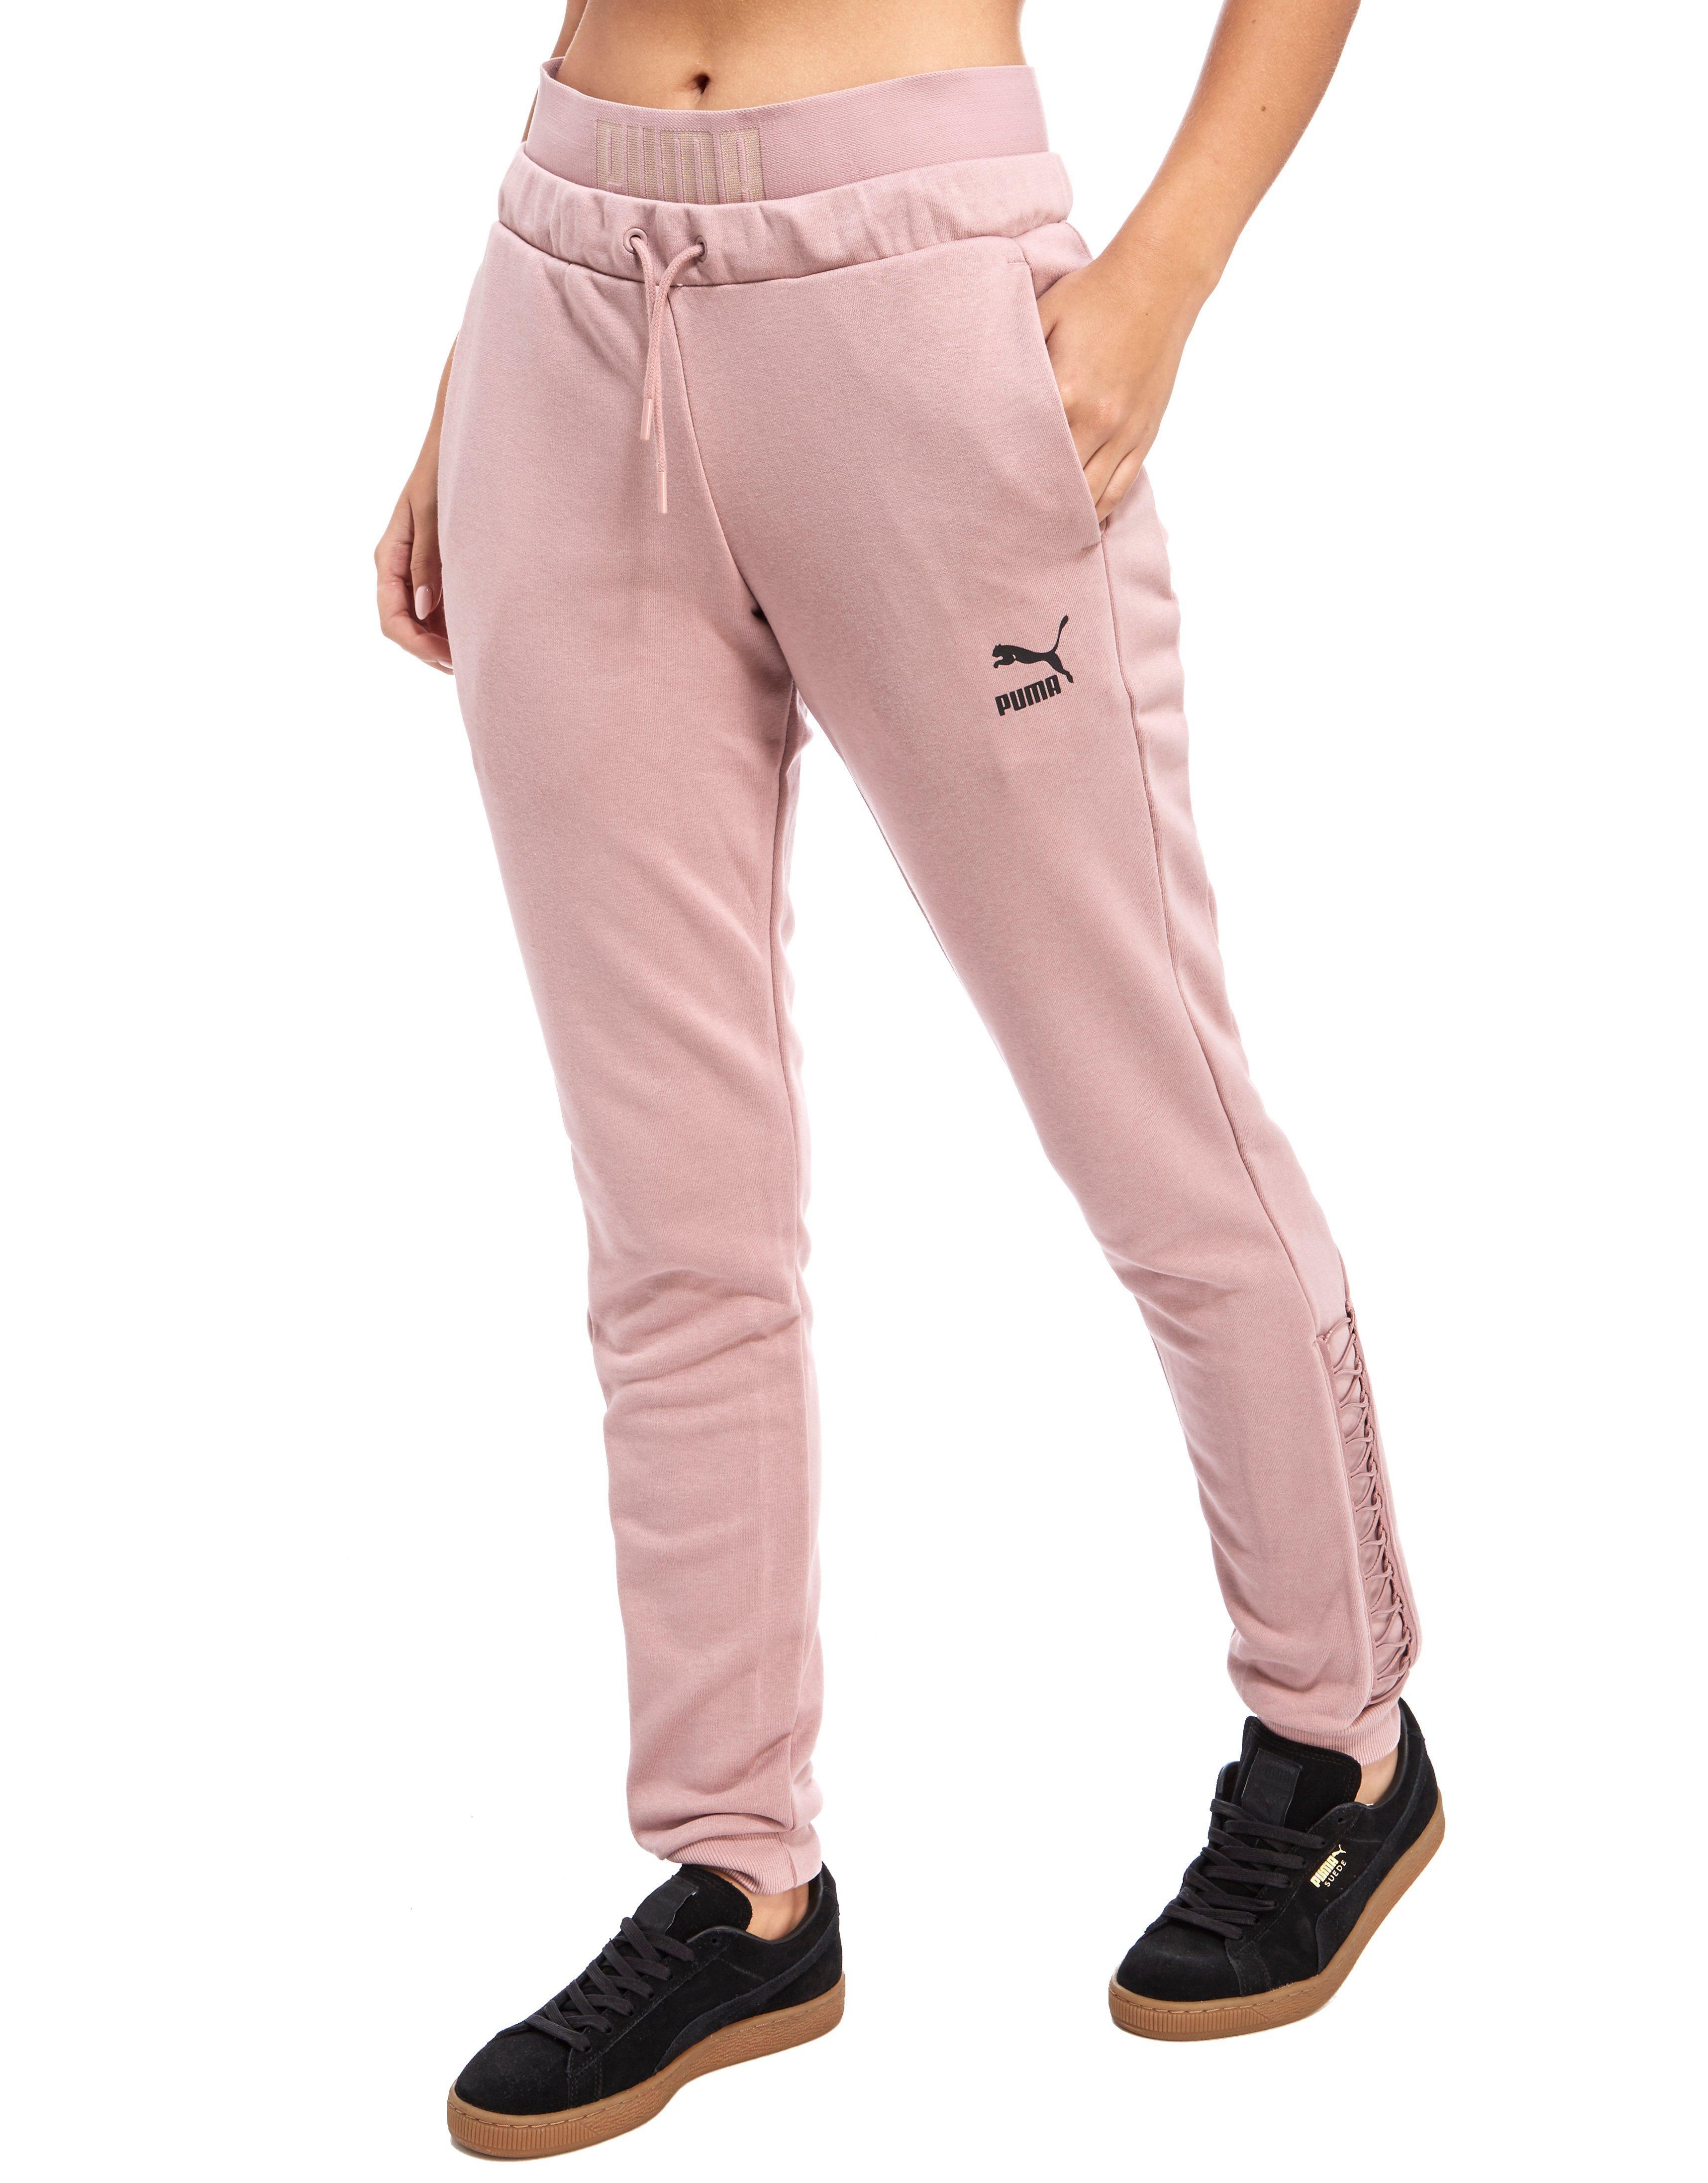 PUMA Cotton Lace Up Joggers in Rose 